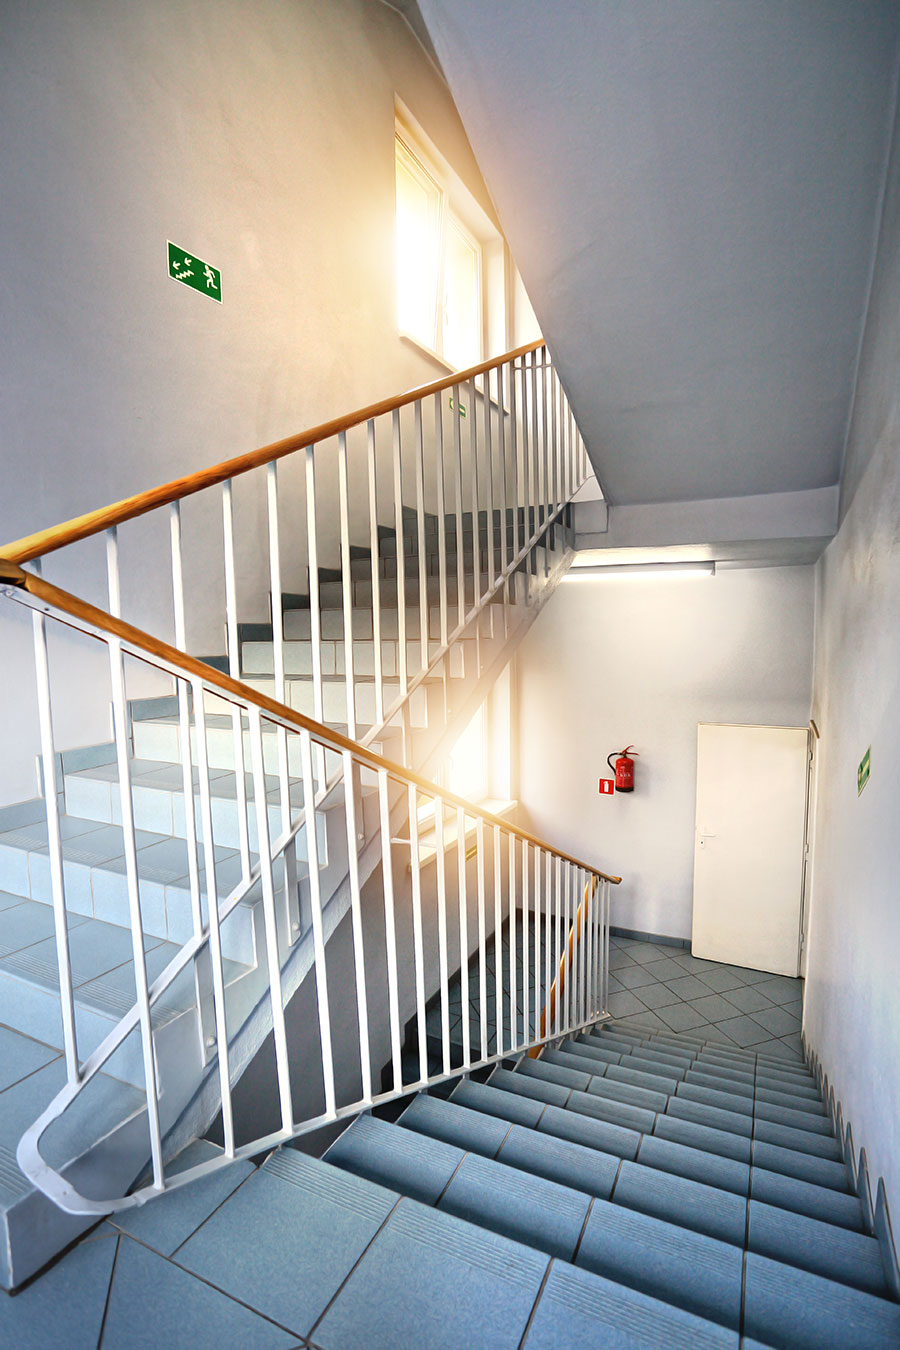 Emergency Staircase, part of a Fire Safety Plan for buildings